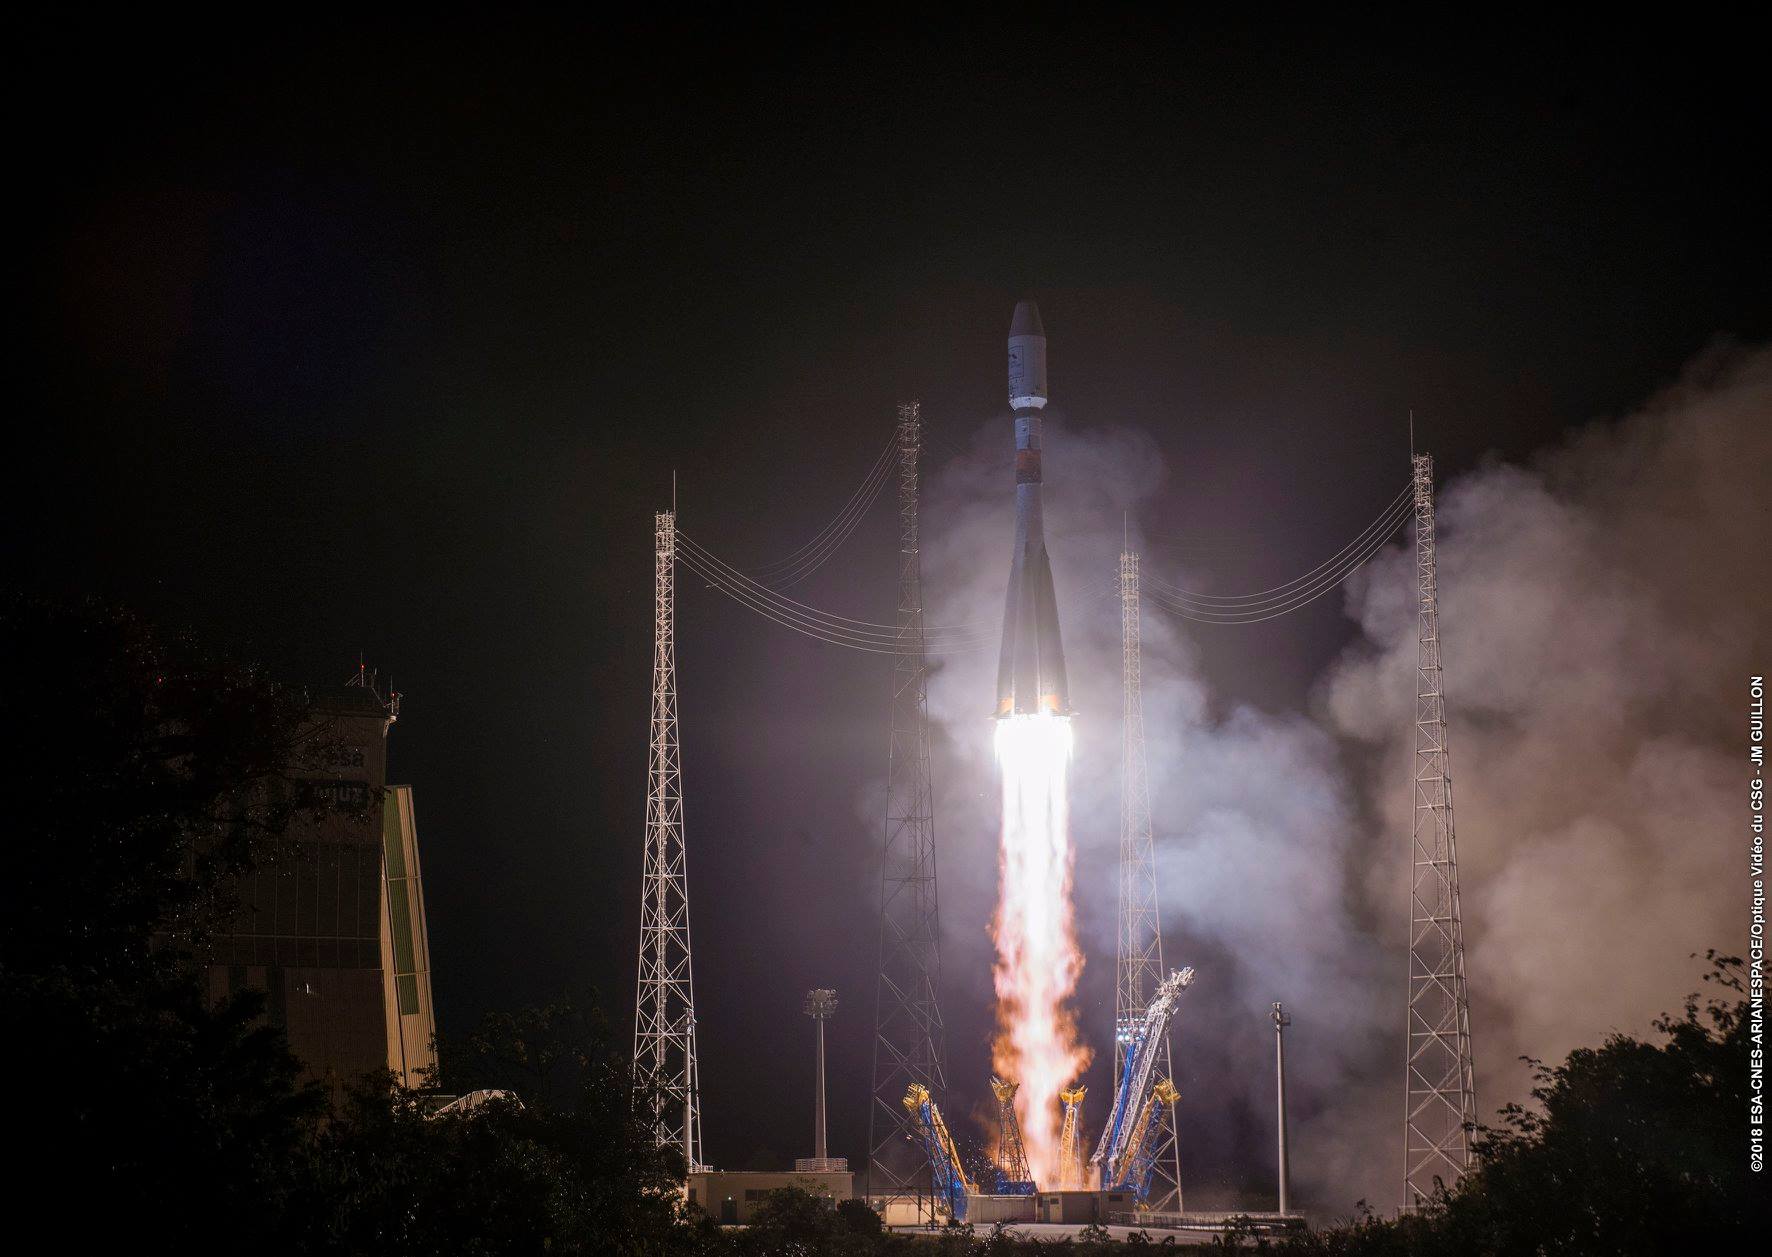 Metop-C Launch Closes Final Chapter On Historic POES Program